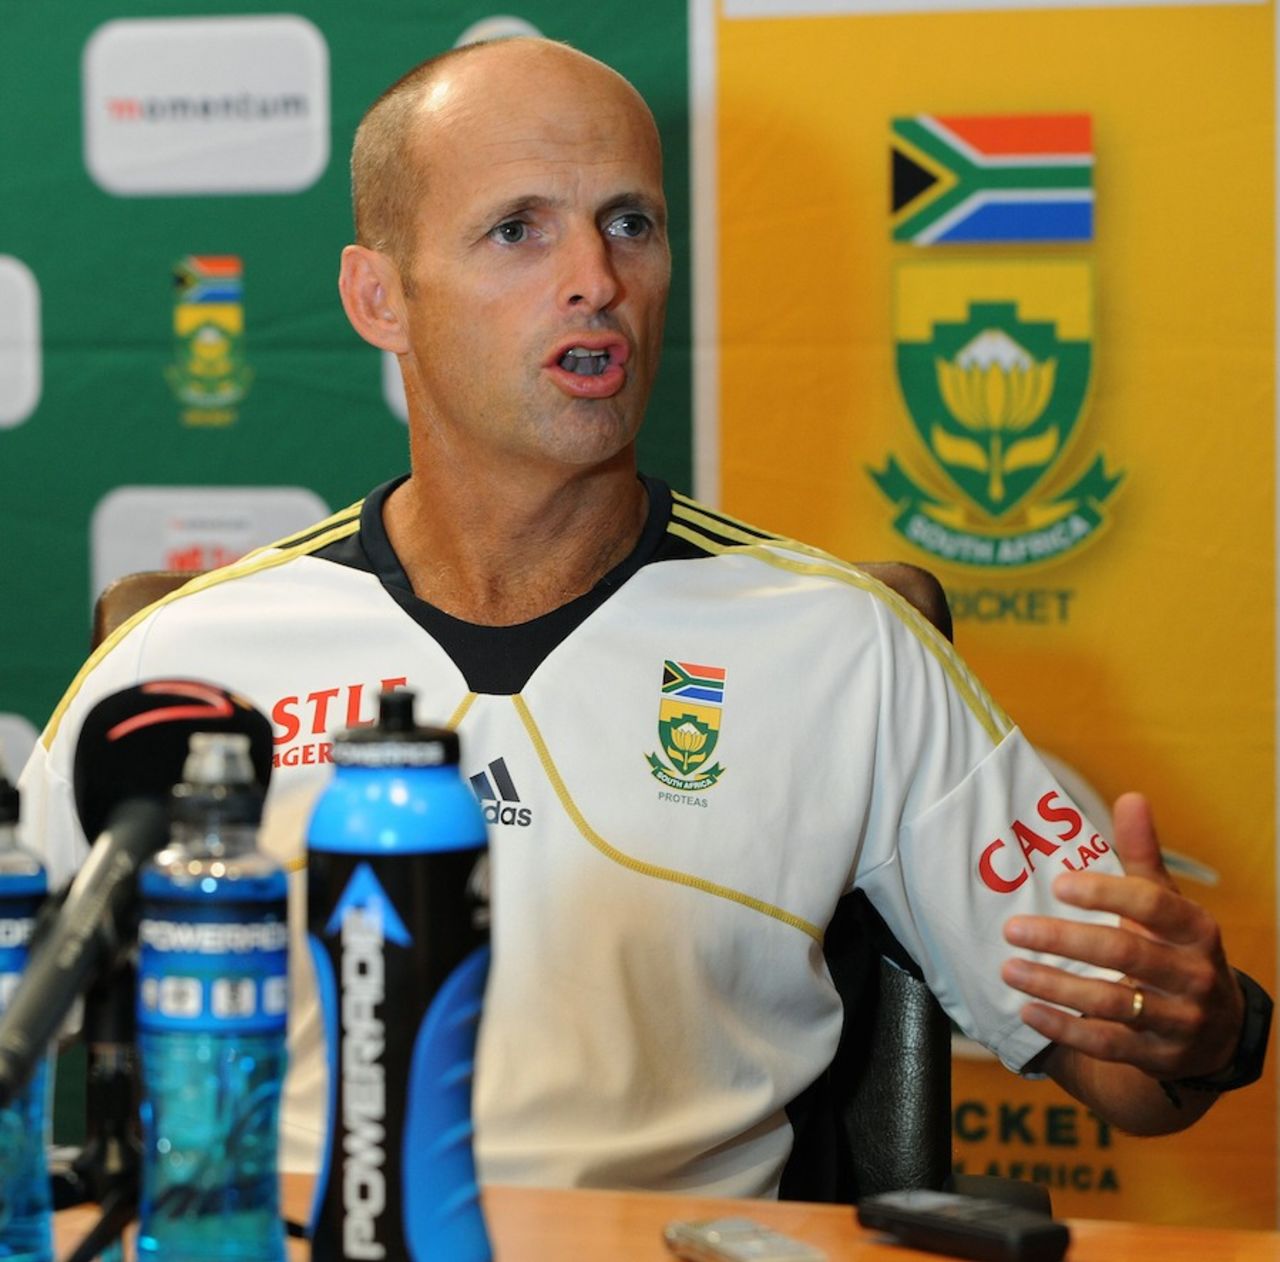 Gary Kirsten at a press conference on the eve of the third ODI against New Zealand, Johannesburg, January 24, 2013